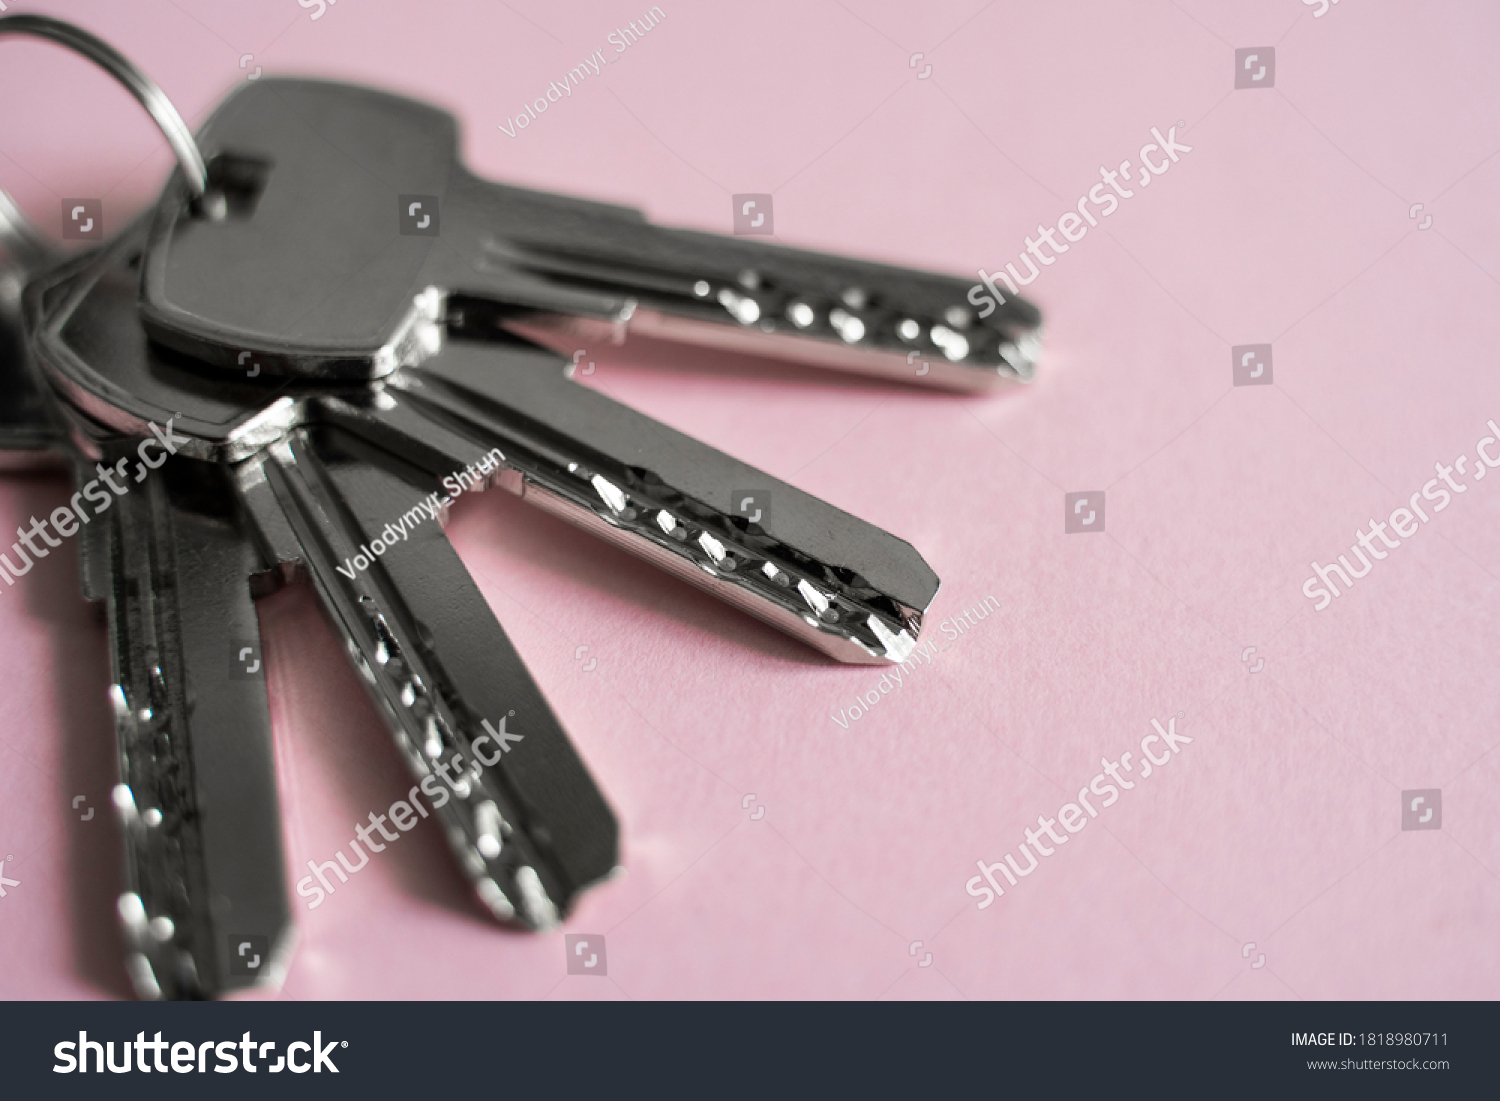 Door key lies on pink background. Set of keys. Bunch of keys. House key. New house concept. Rental and Selling. #1818980711